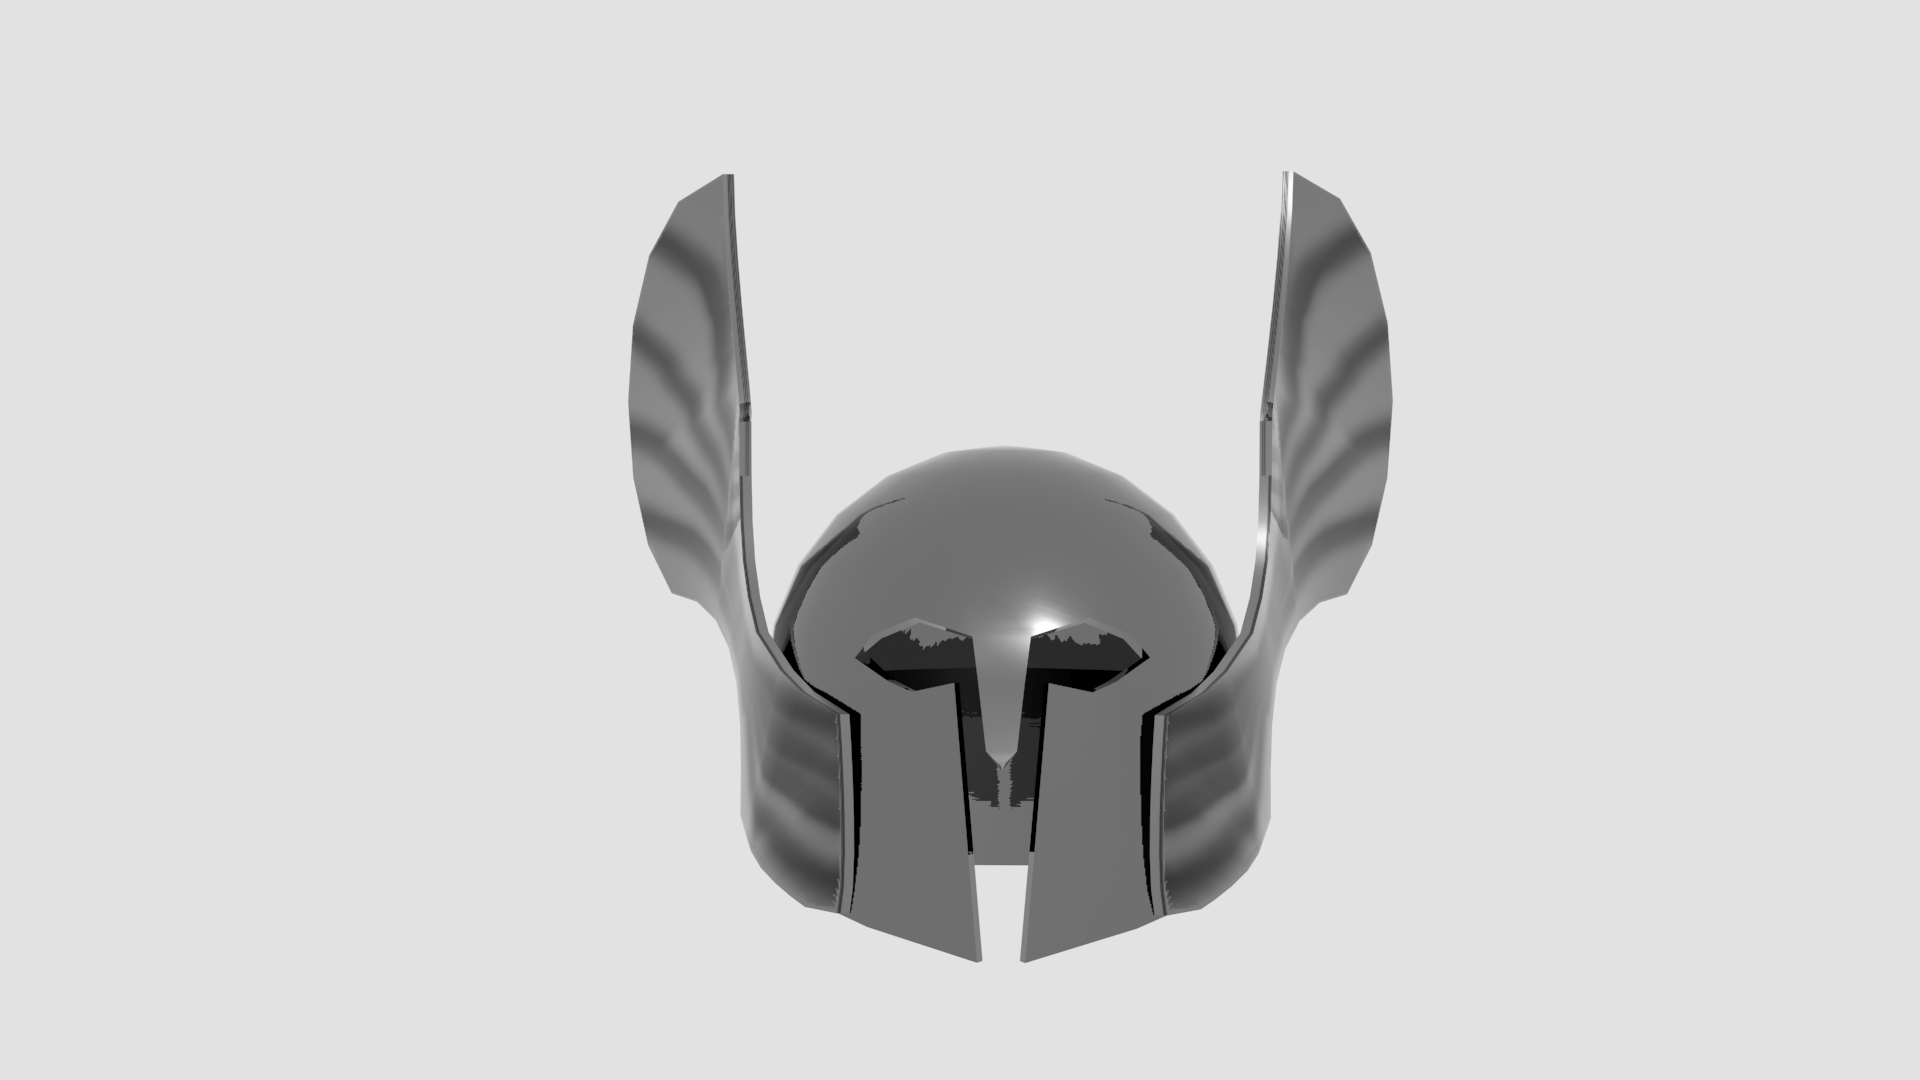 3D rendered helmet with stylized wings on the sides.